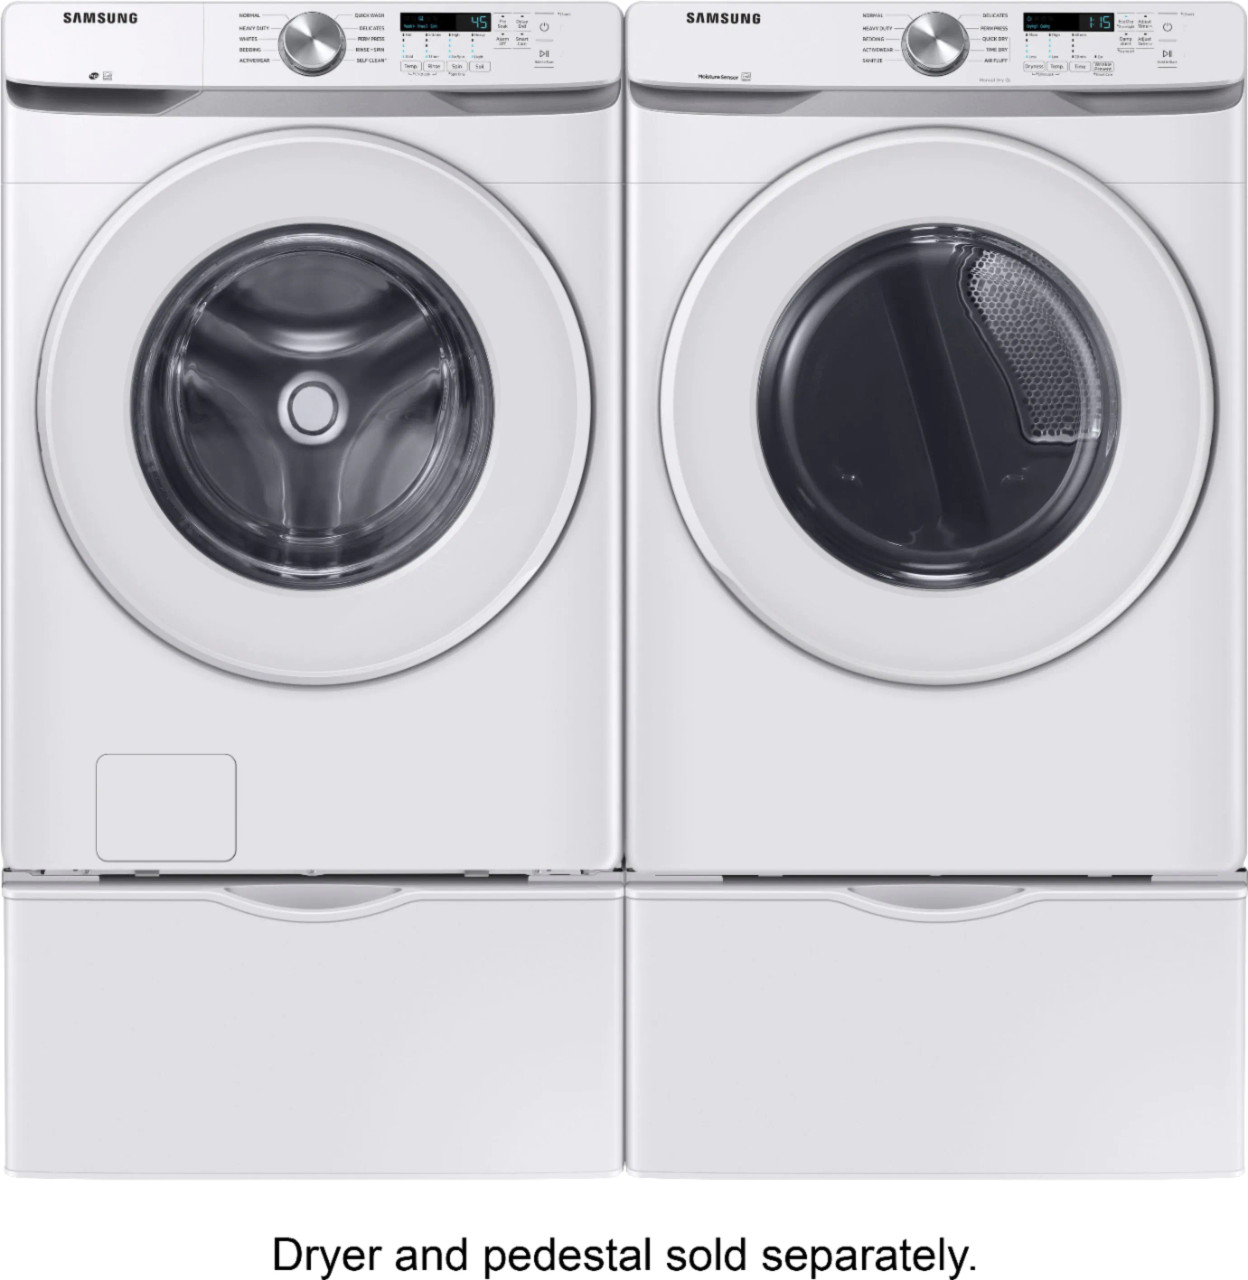 The Samsung Front Load Washer & Dryer sold at Bolin Rental serving  Clarksville, TN, and Madisonville and Hopkinsville, KY.